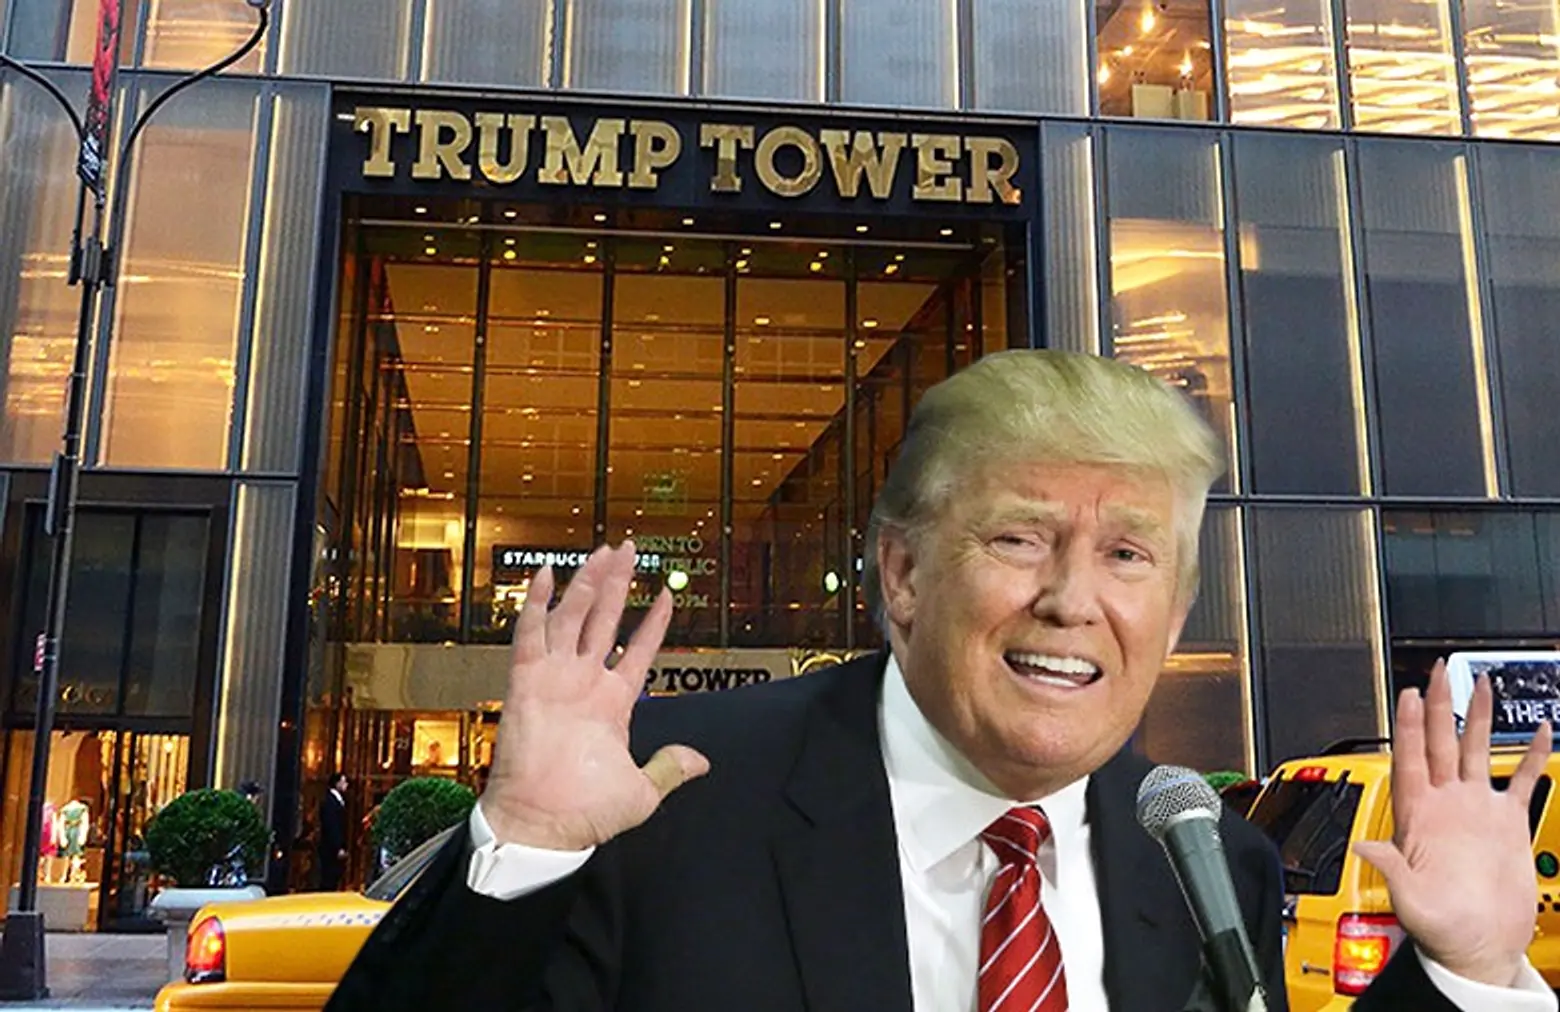 Trump buildings rank as some of the biggest polluters in NYC